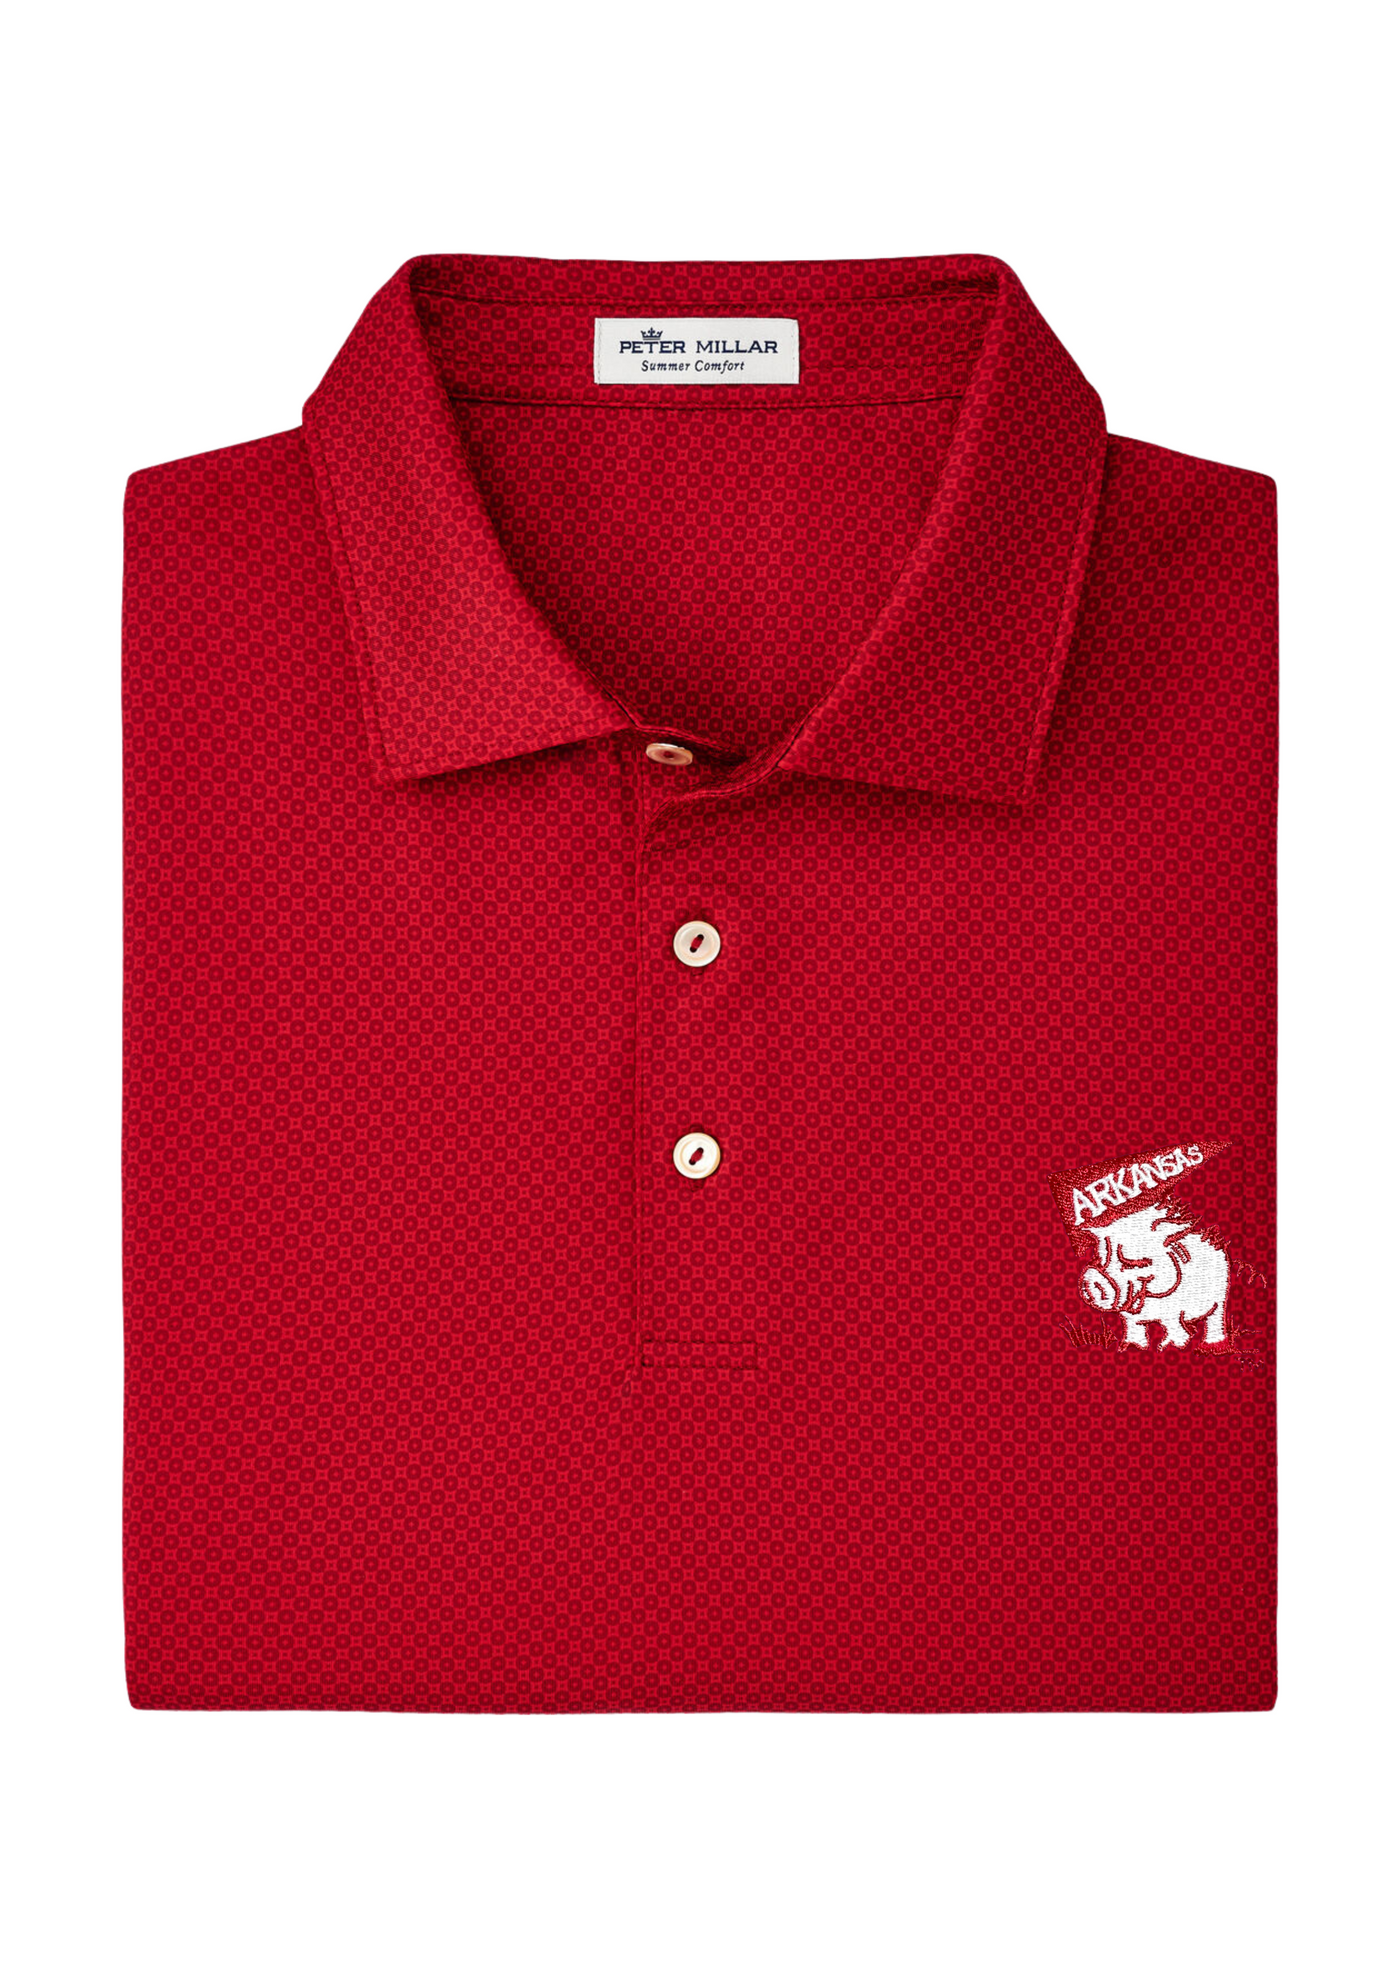 Pennant Hog Dolly Performance Jersey Polo